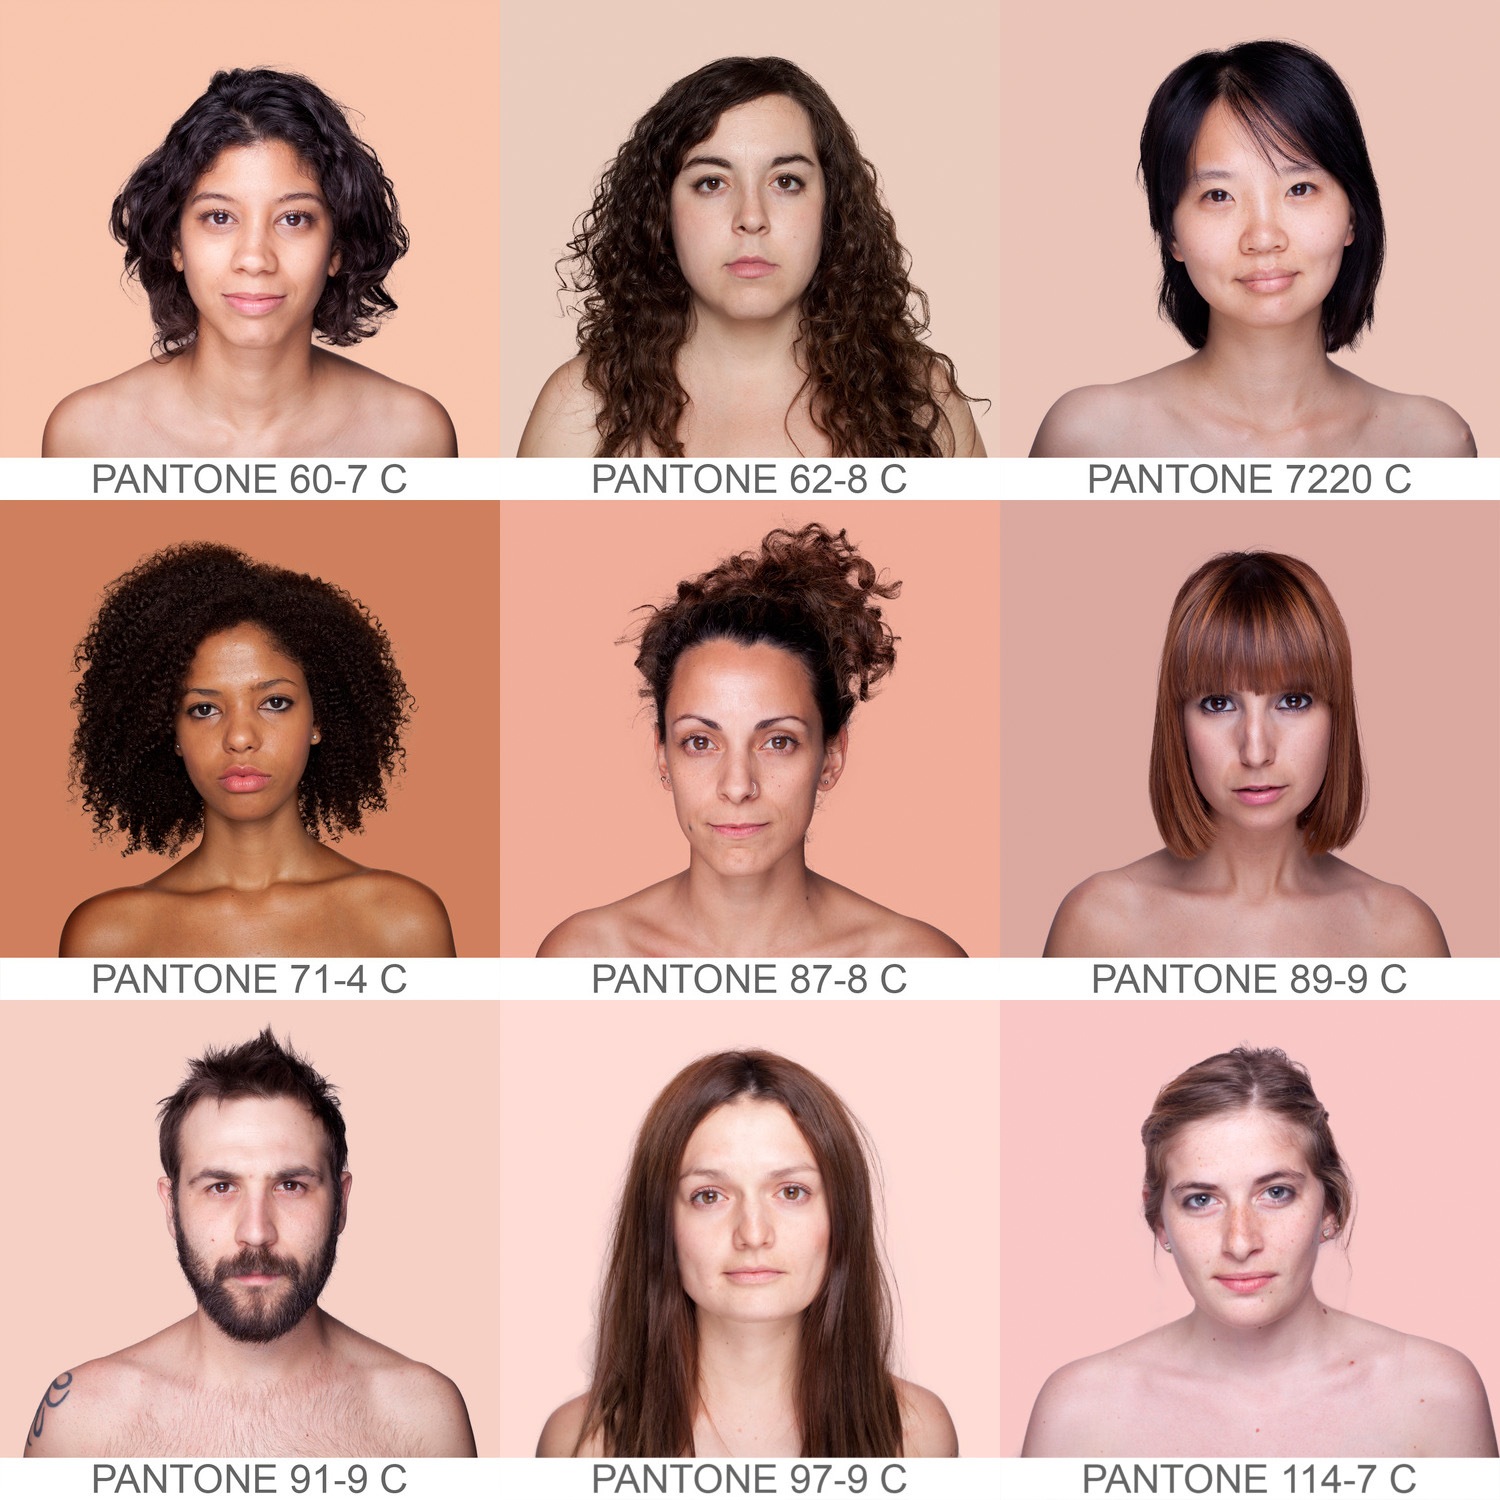 The Evolution Of Skin Colour In Humans